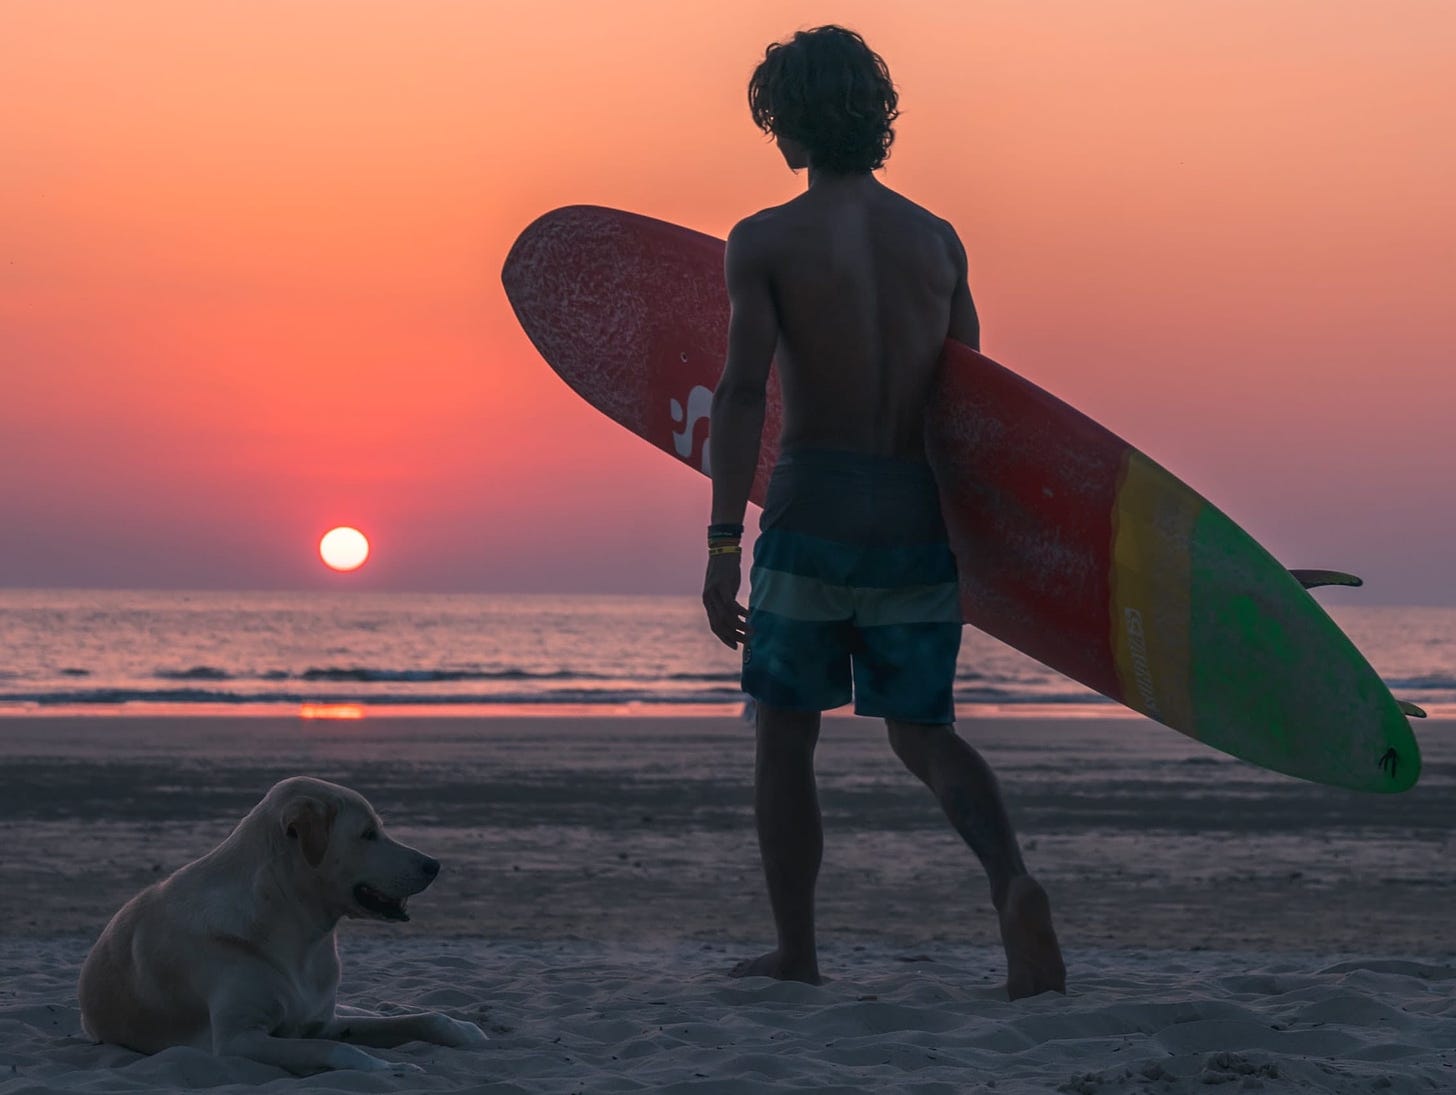 Man with surfboard on the beach at sunset